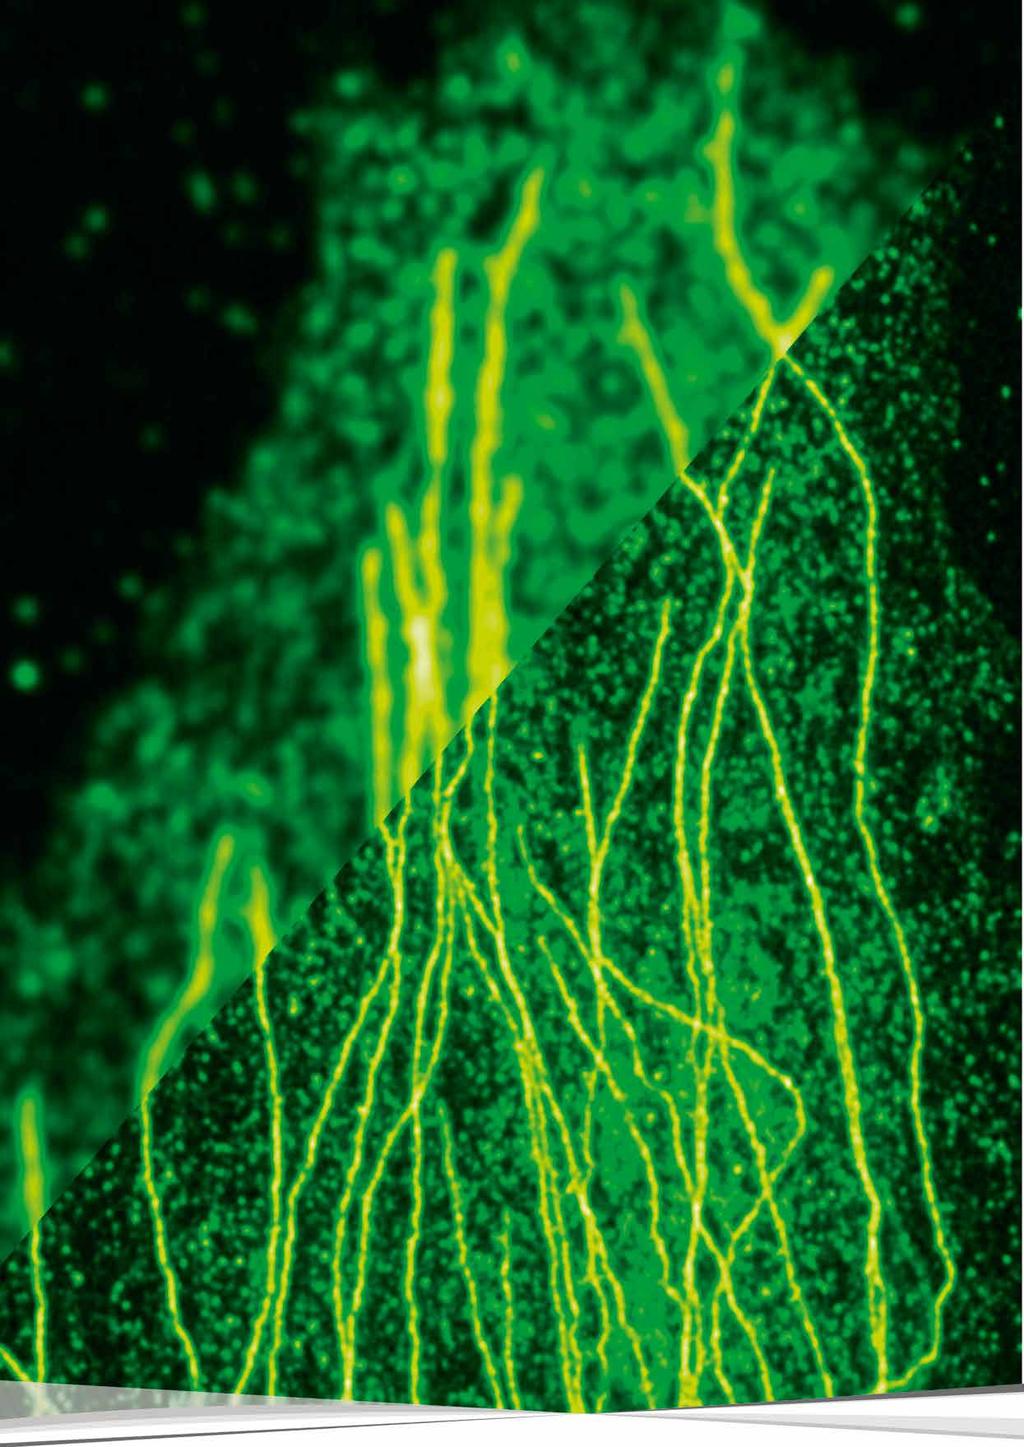 STED beyond imaging Higher resolution, more information STED significantly enhances the resolution of confocal fluorescence microscopy.